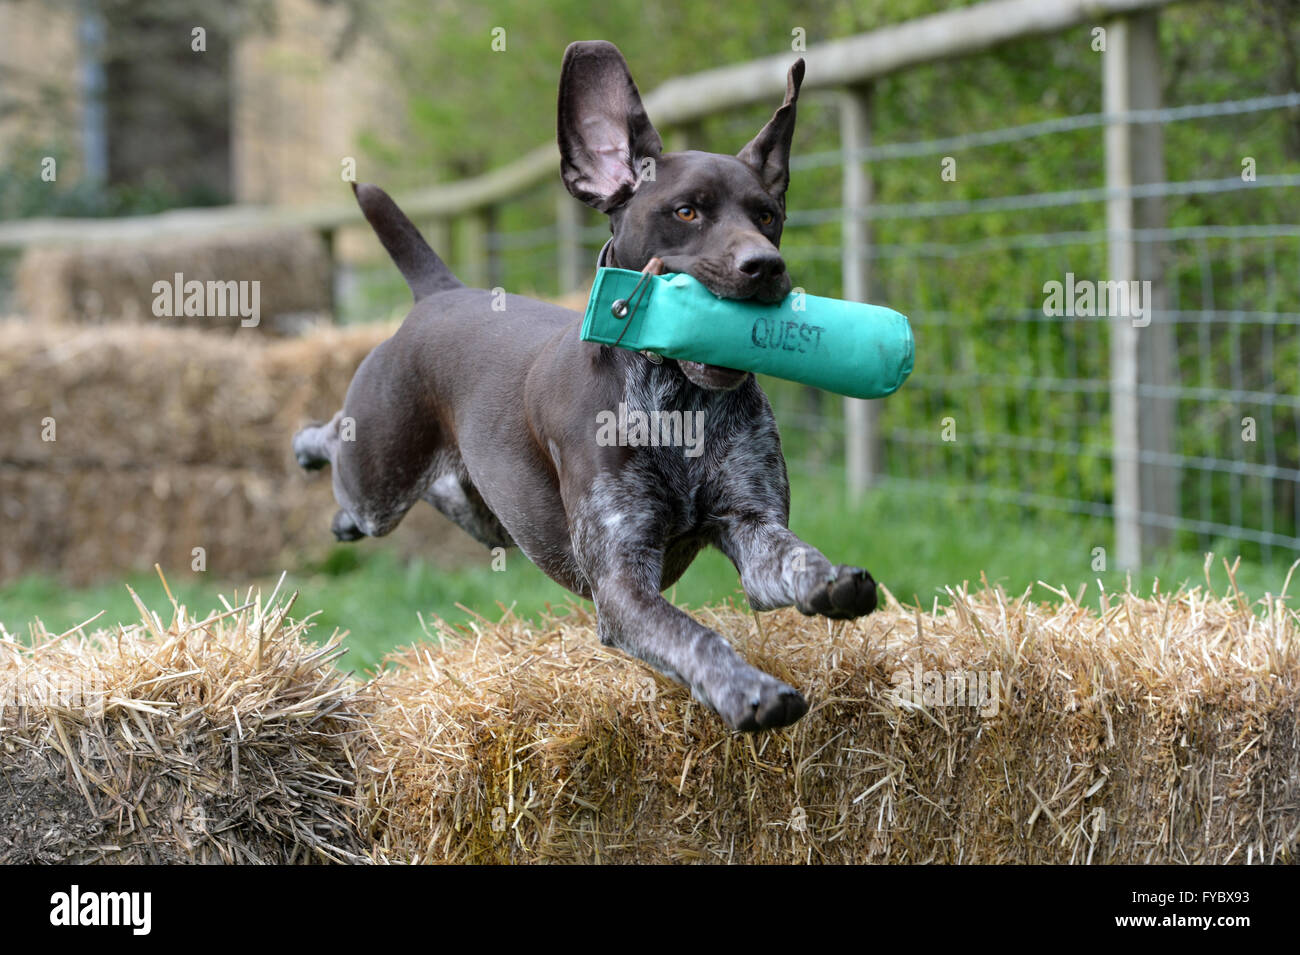 Pointer Dog jumping over straw bales having retrieved a green dummy in mouth  Scurry event  Ears flying Stock Photo